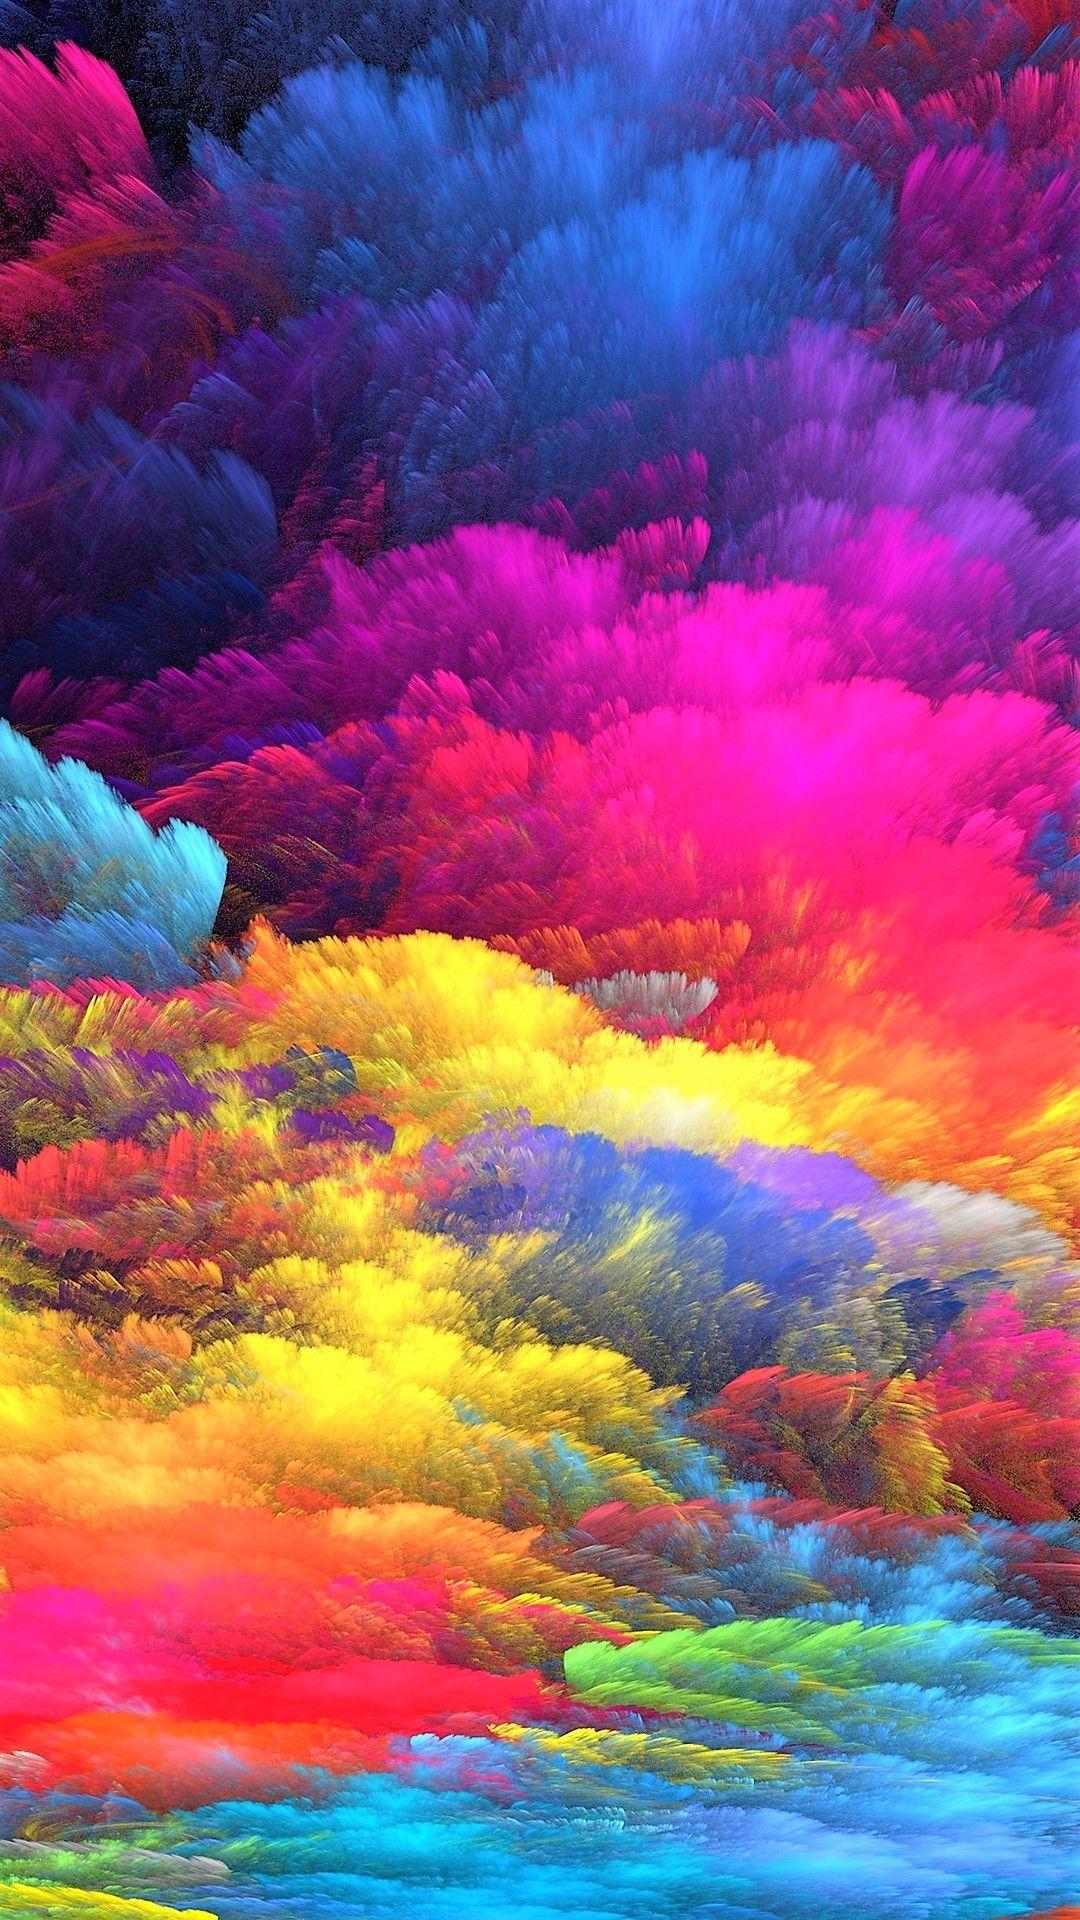 Color Explosion Apple iPhone 5s HD wallpaper available for free